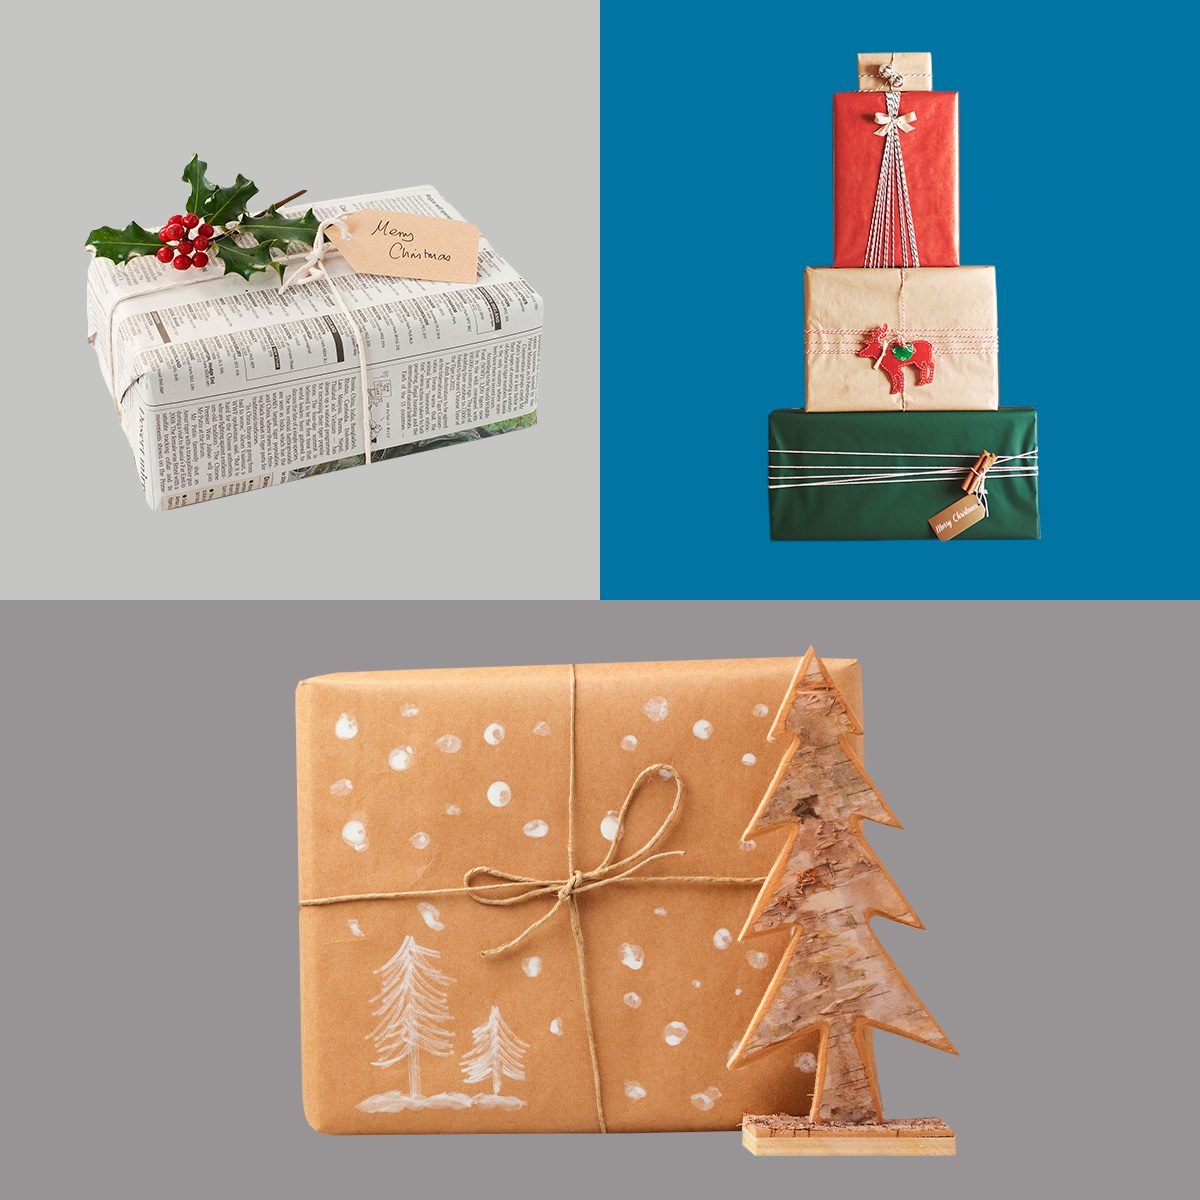 Wrapping ideas with brown paper - 10 quick, pretty & easy options